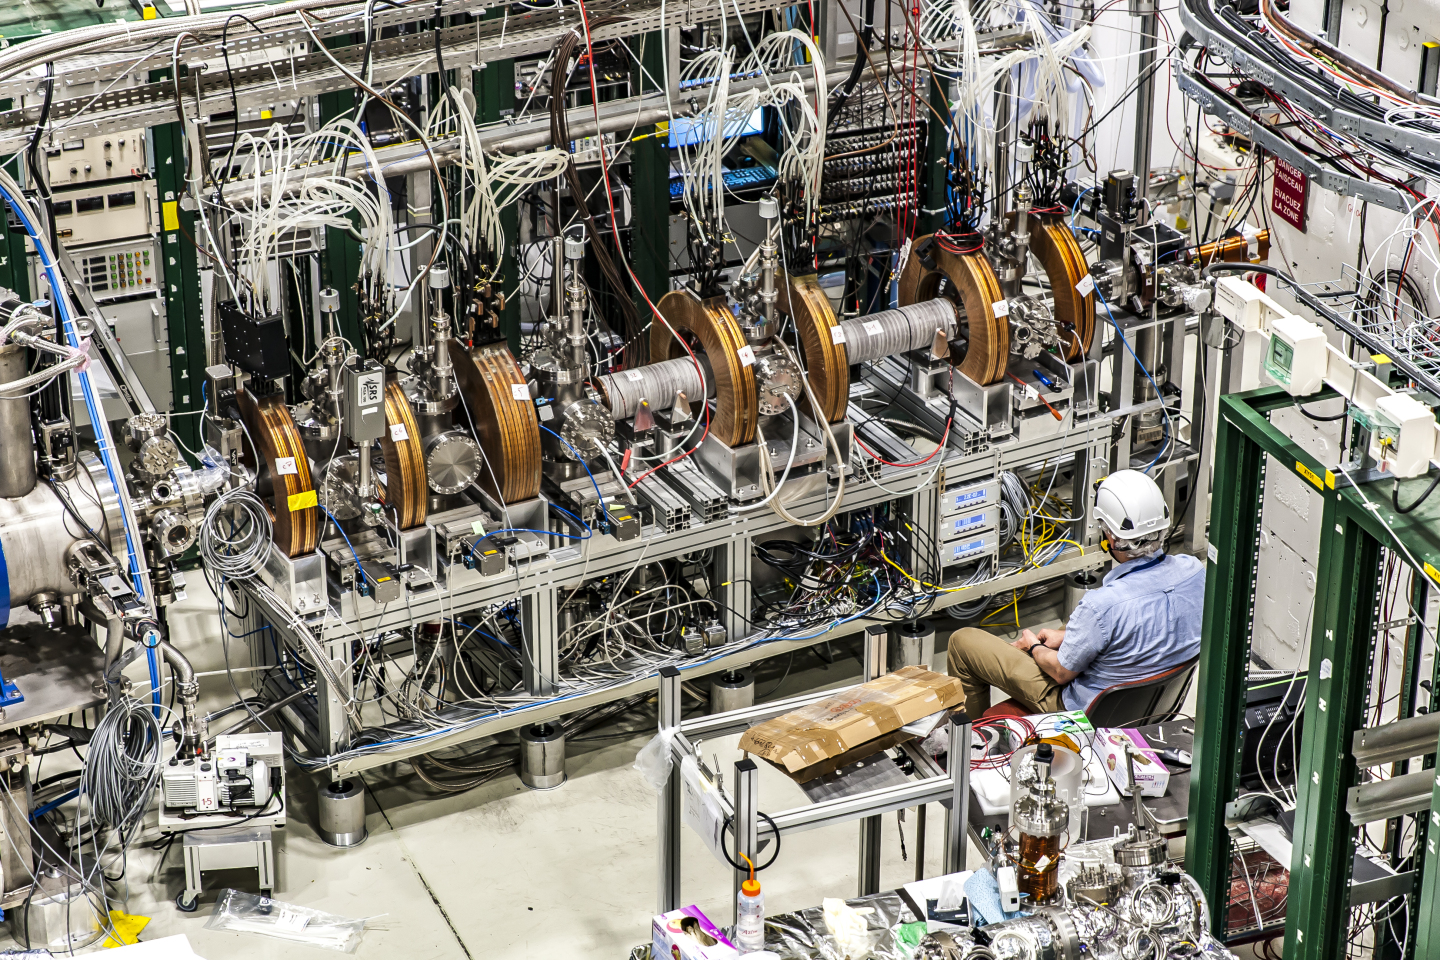 The GBAR experiment in the Antiproton Decelerator hall.